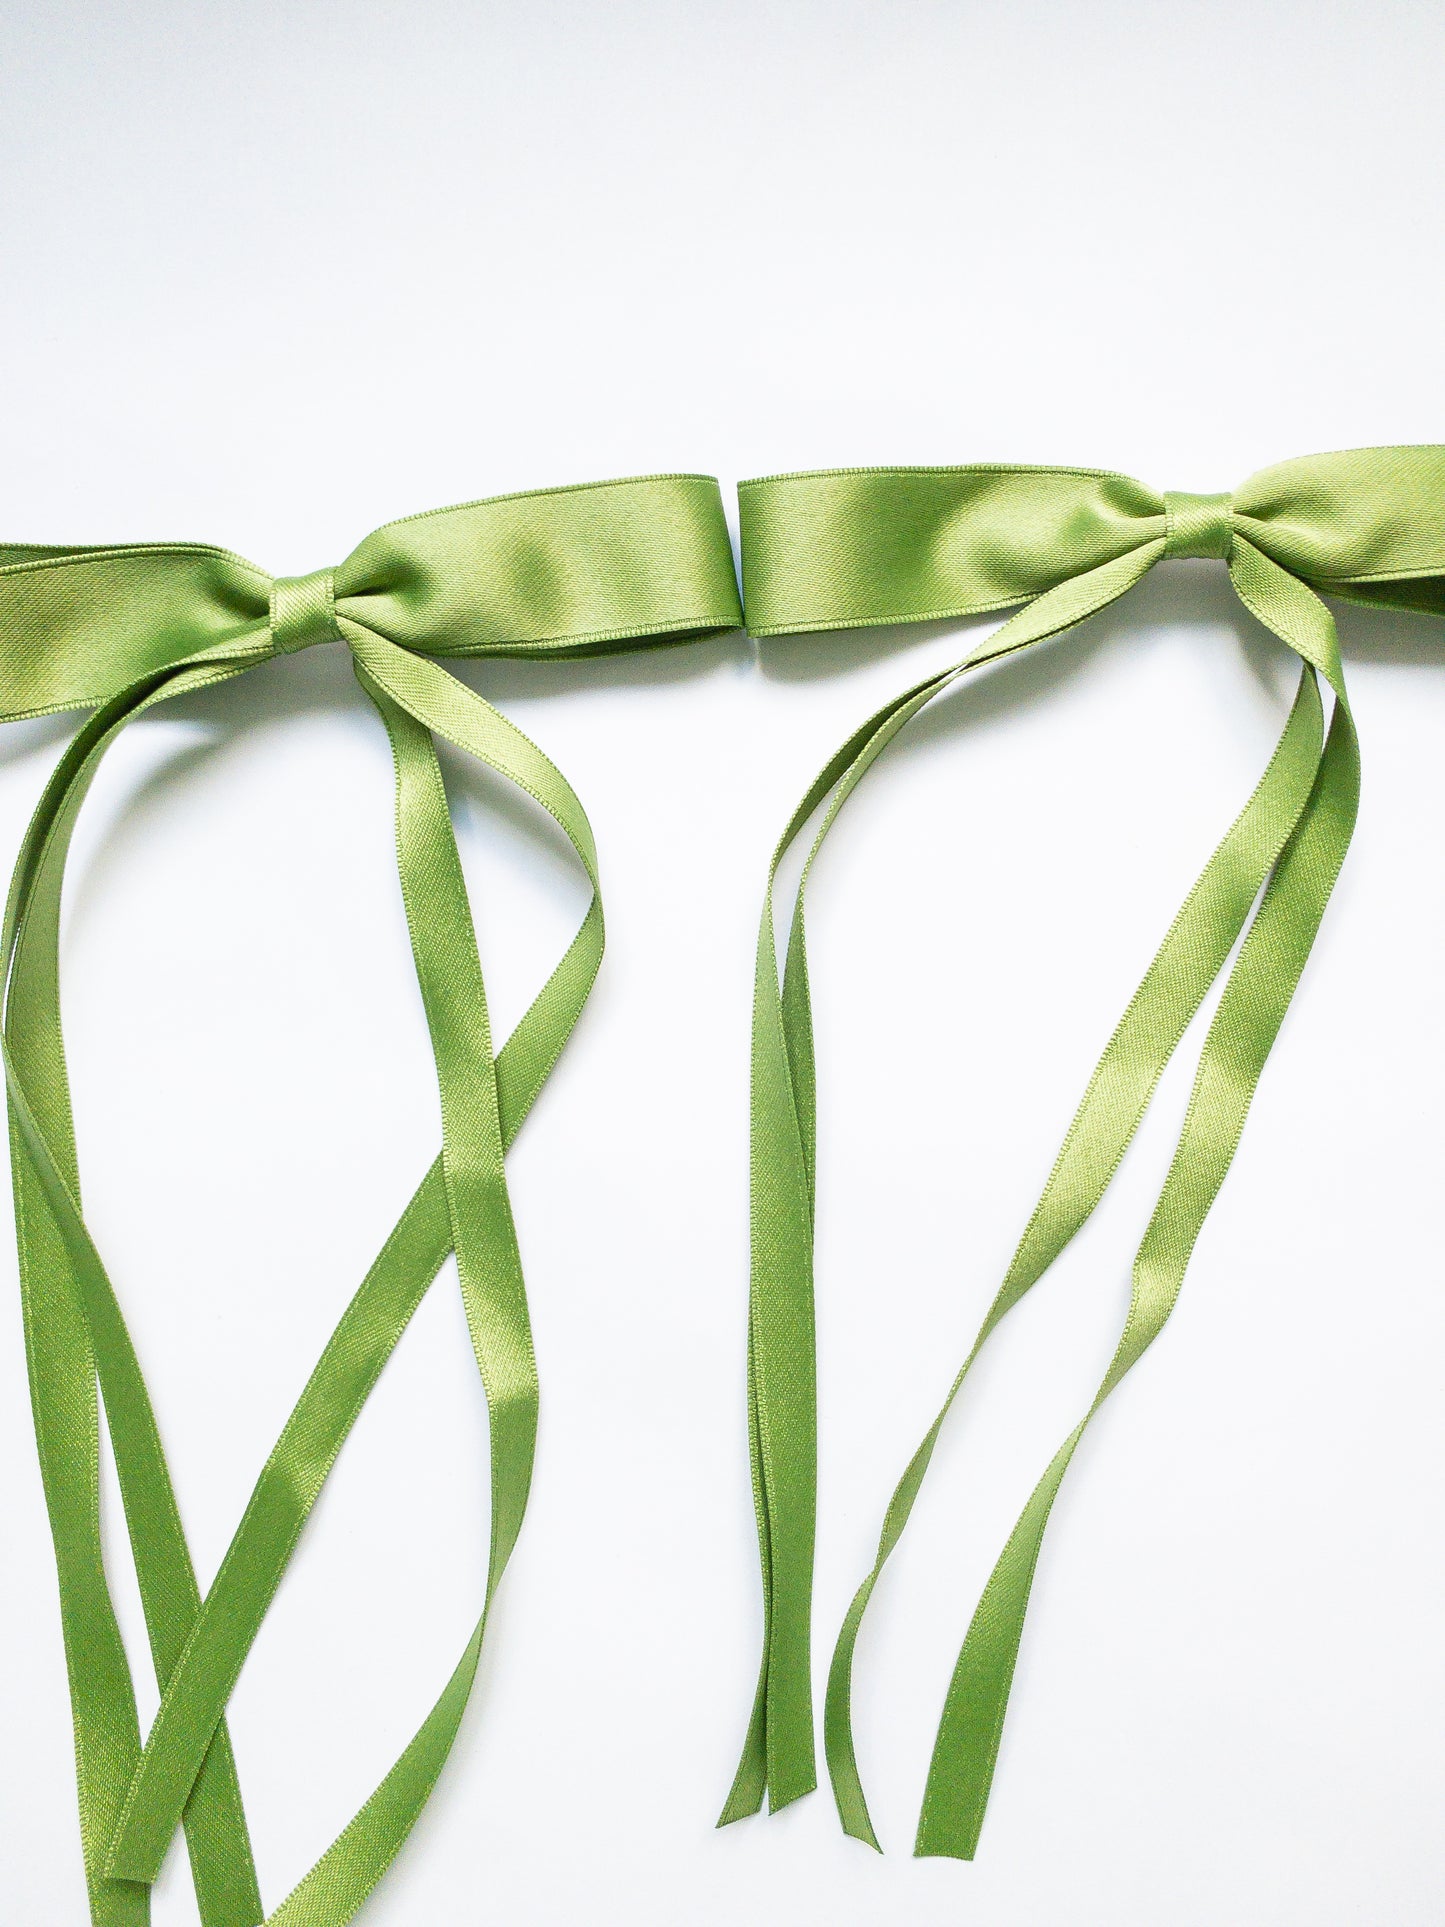 Ballet core in full effect! These beautiful green ribbon bows come as a set of 2 and are alligator clips, making them so easy to affix to your hair. Each bow has 2 ribbon strands on each side. Classic and beautiful!